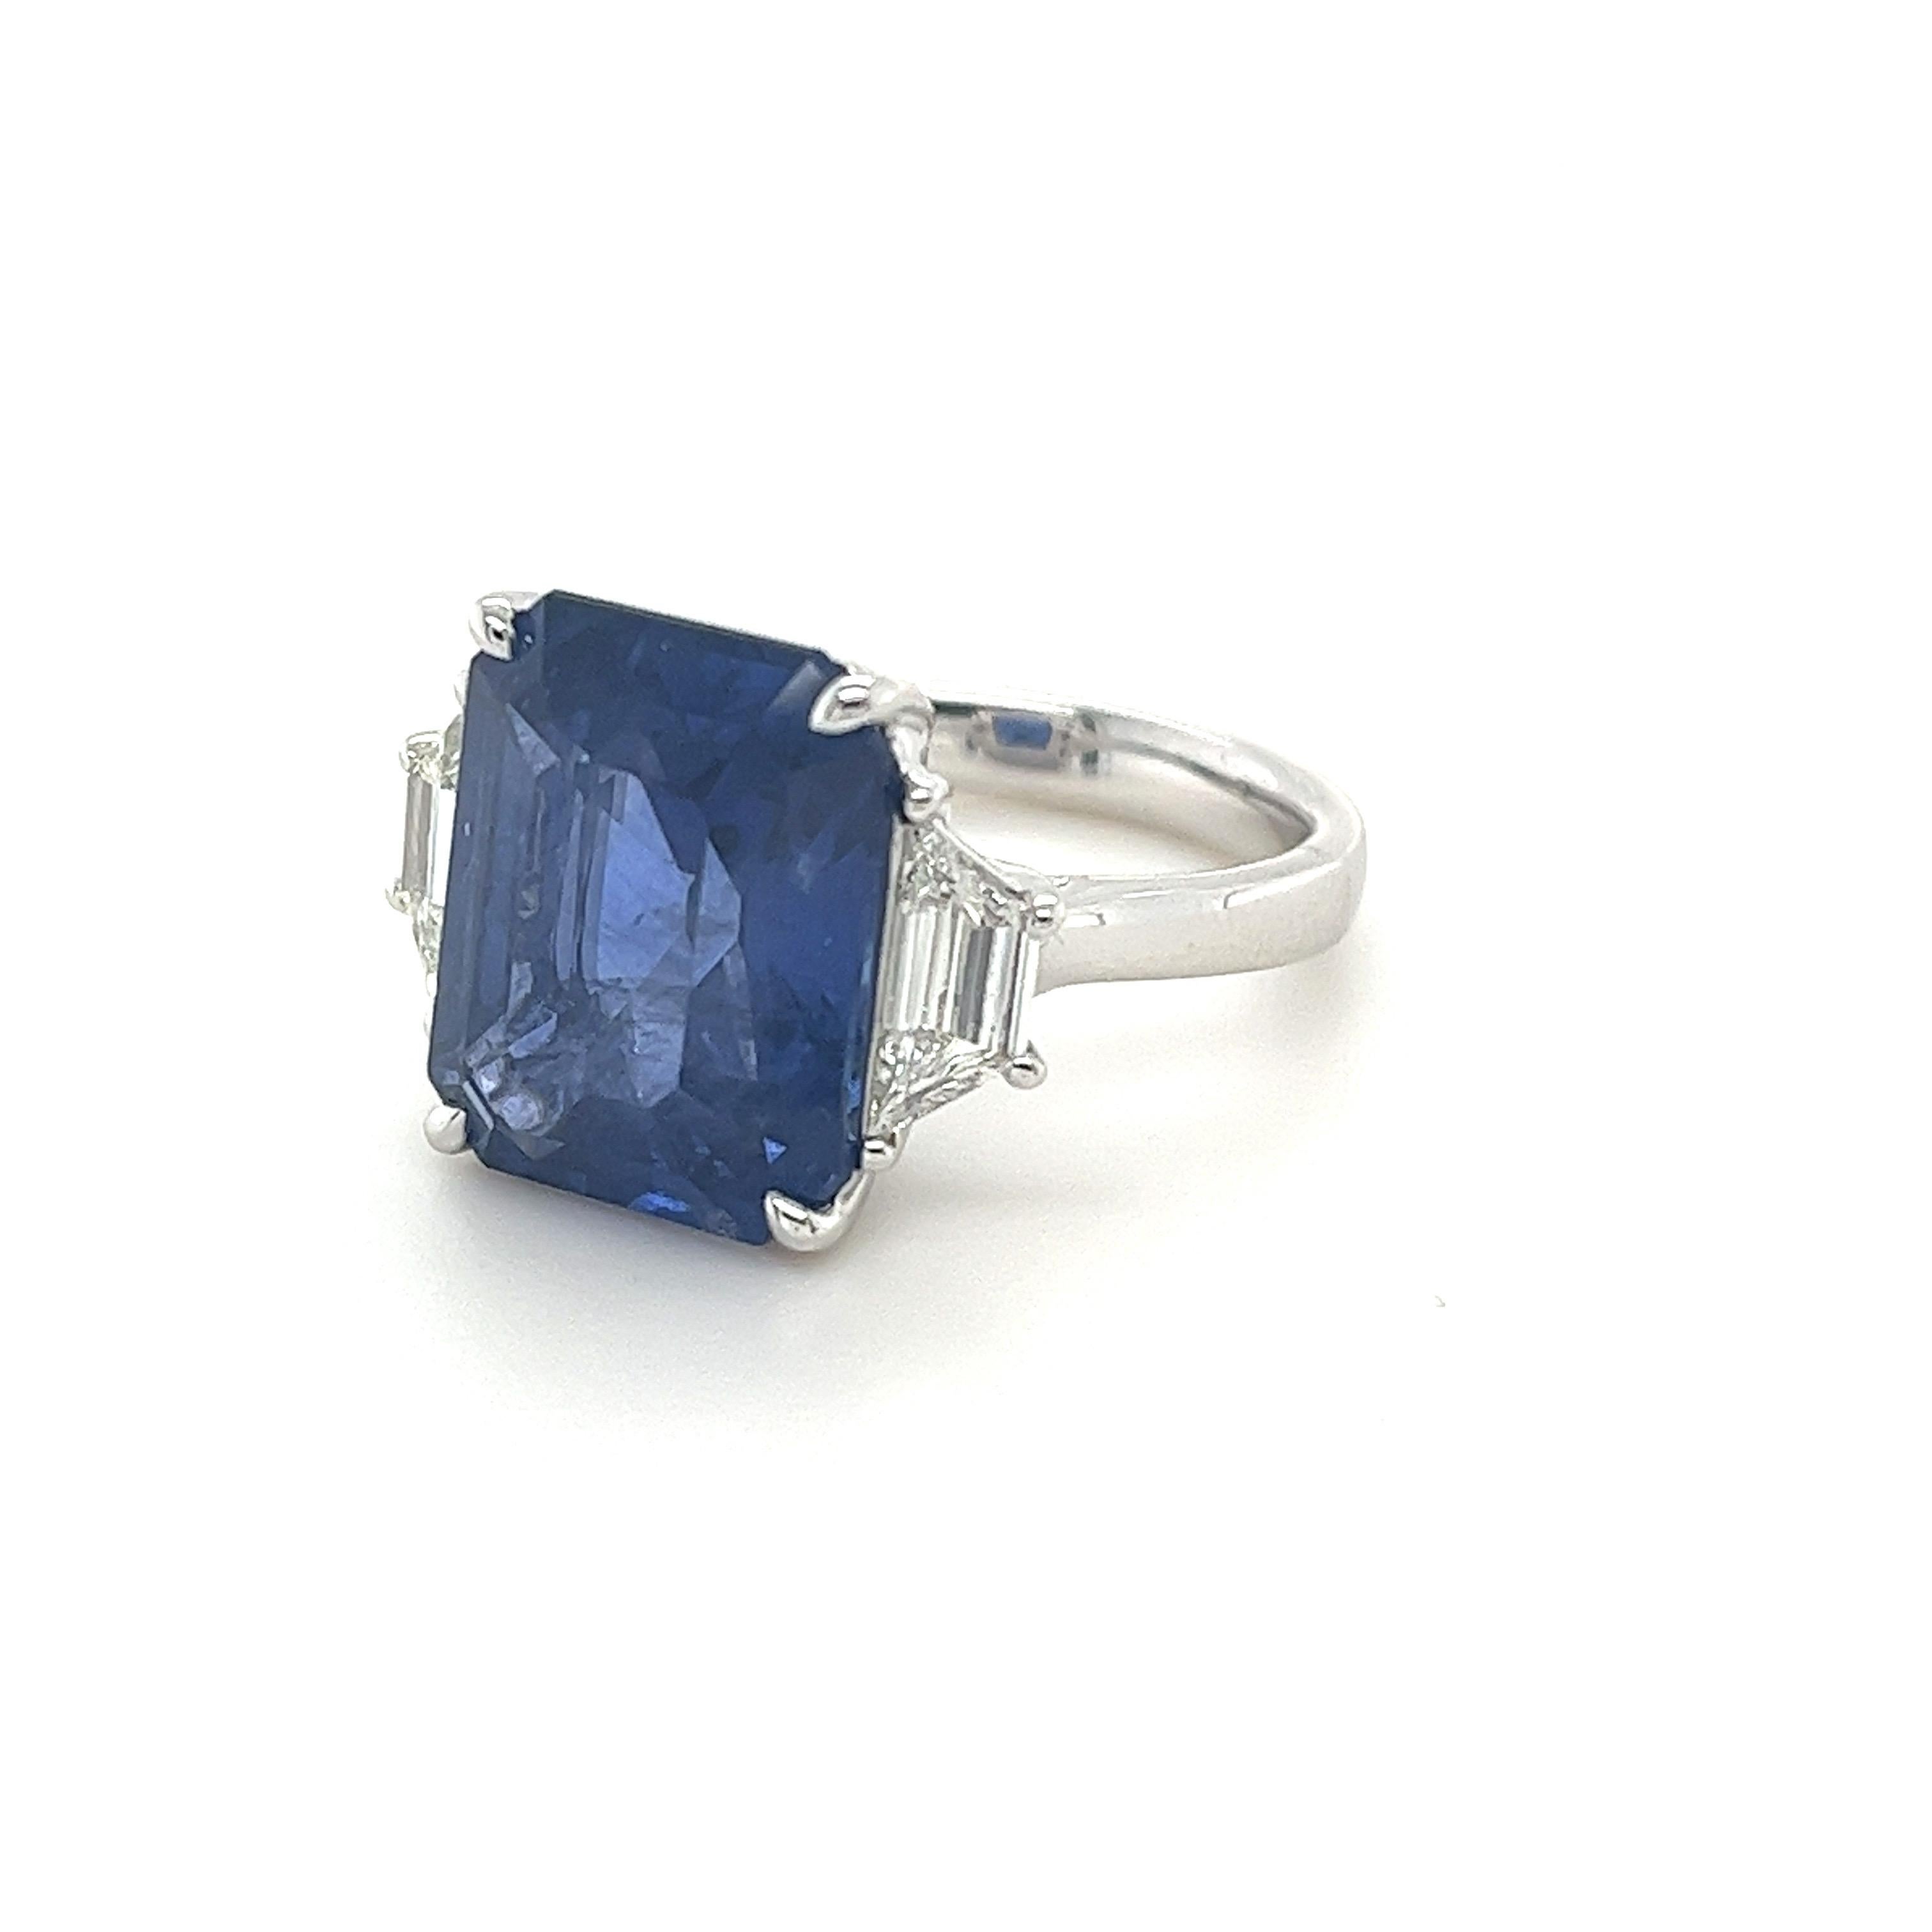 Certified Emerald Cut Ceylon Sapphire weighing 10.98 carats
Measuring (14.33x11.39x6.64) mm
Trapezoid Diamonds weighing .74 carats
H-VS
Set in Platinum Ring
10.28 g
